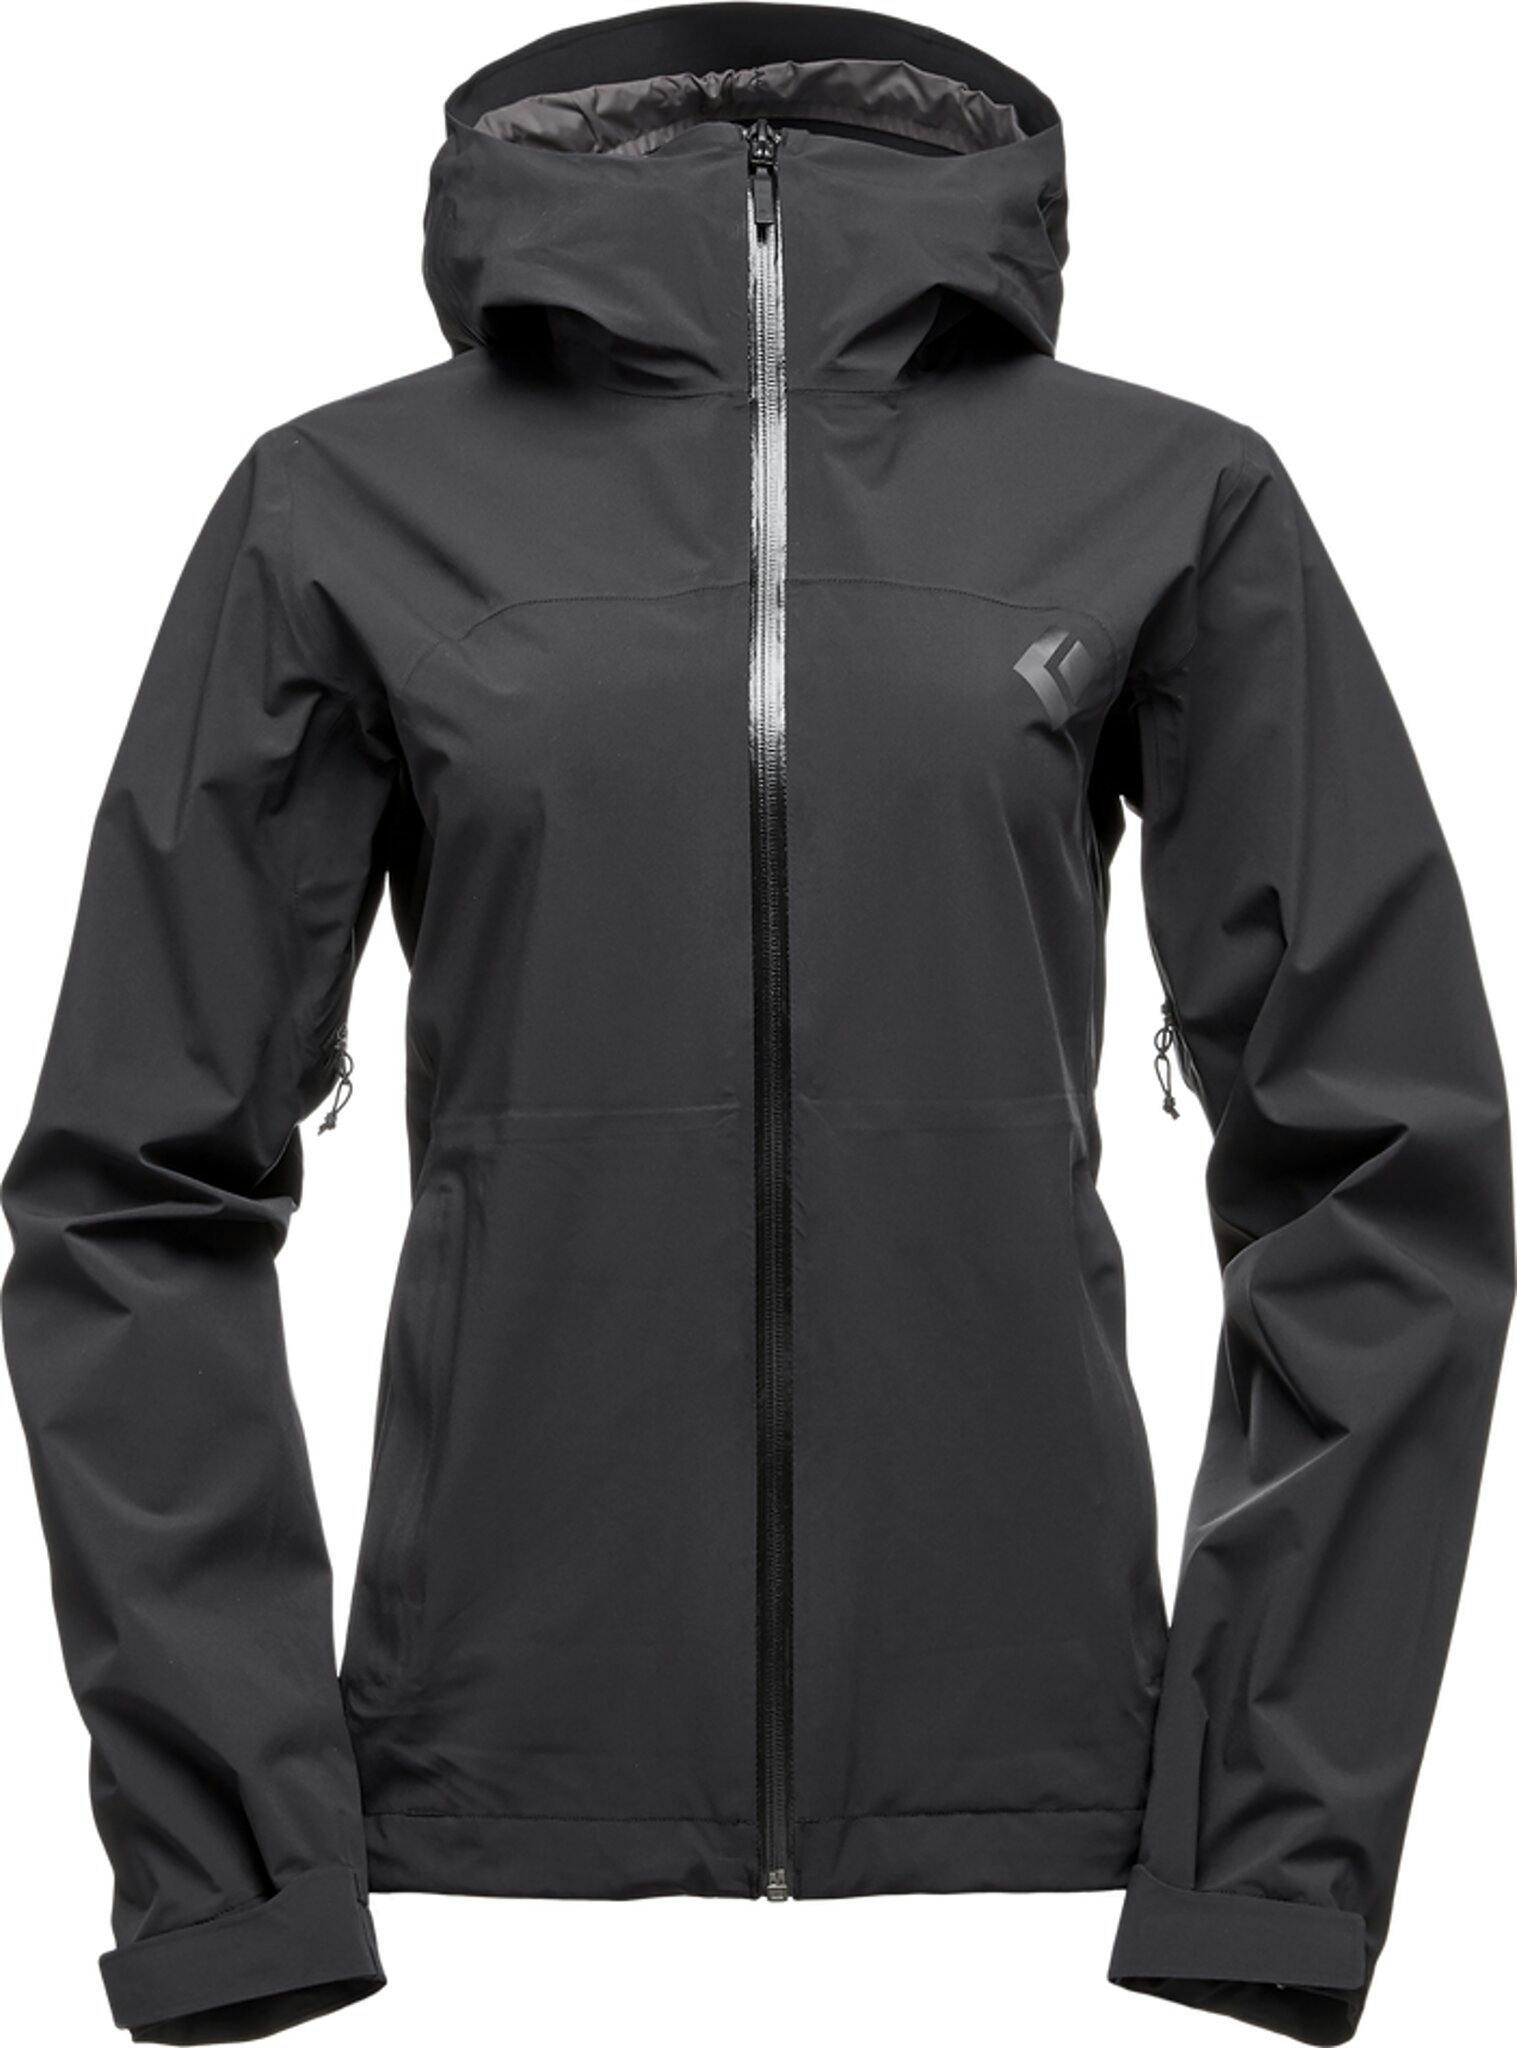 Product image for Stormline Stretch Rain Shell - Women's